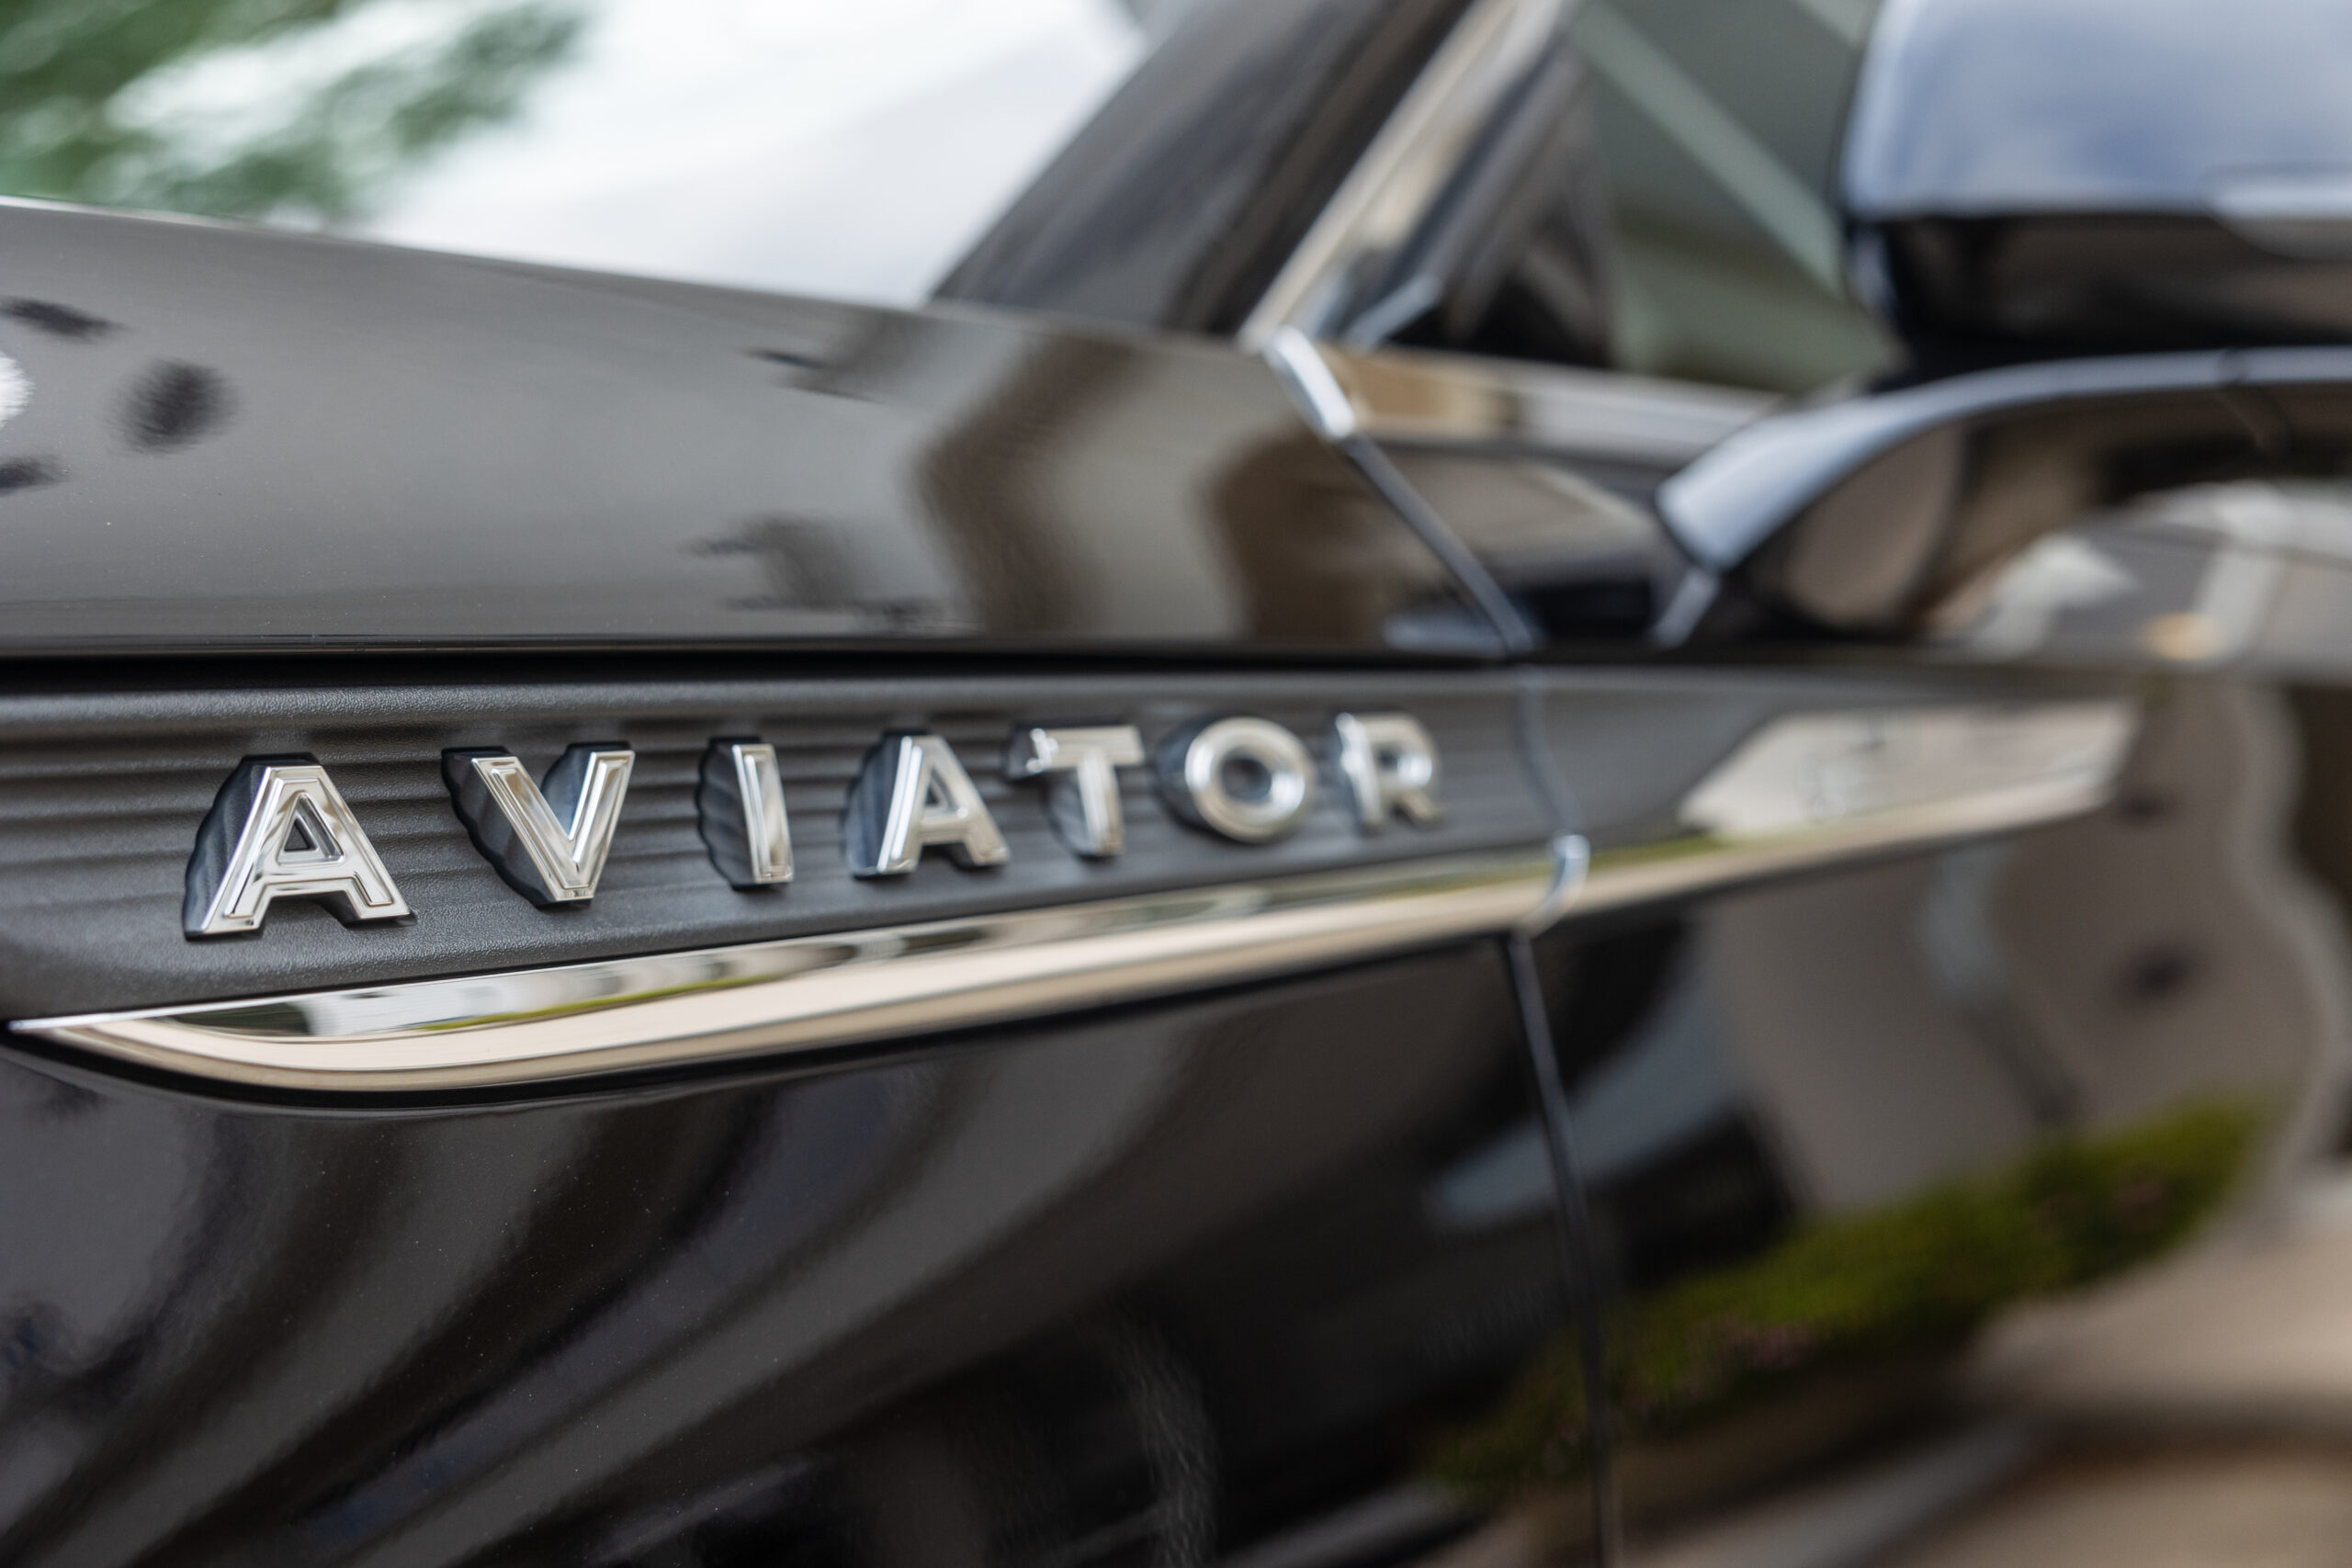 A close-up of the Aviator logo on a luxurious vehicle.